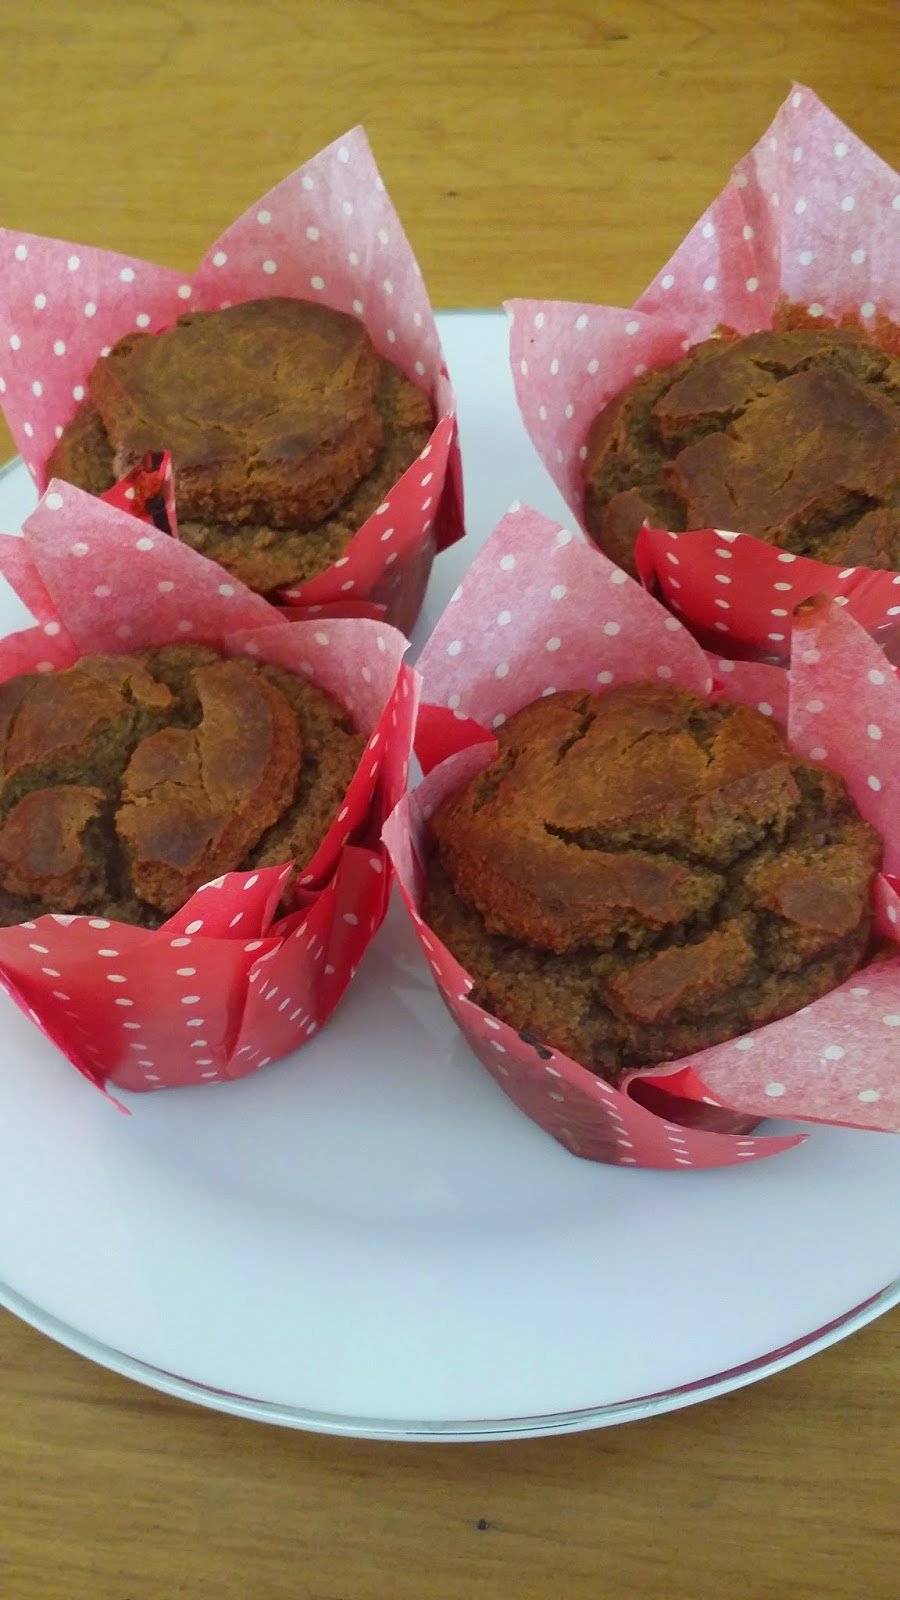 Paleo Banana and Almond Butter Muffins